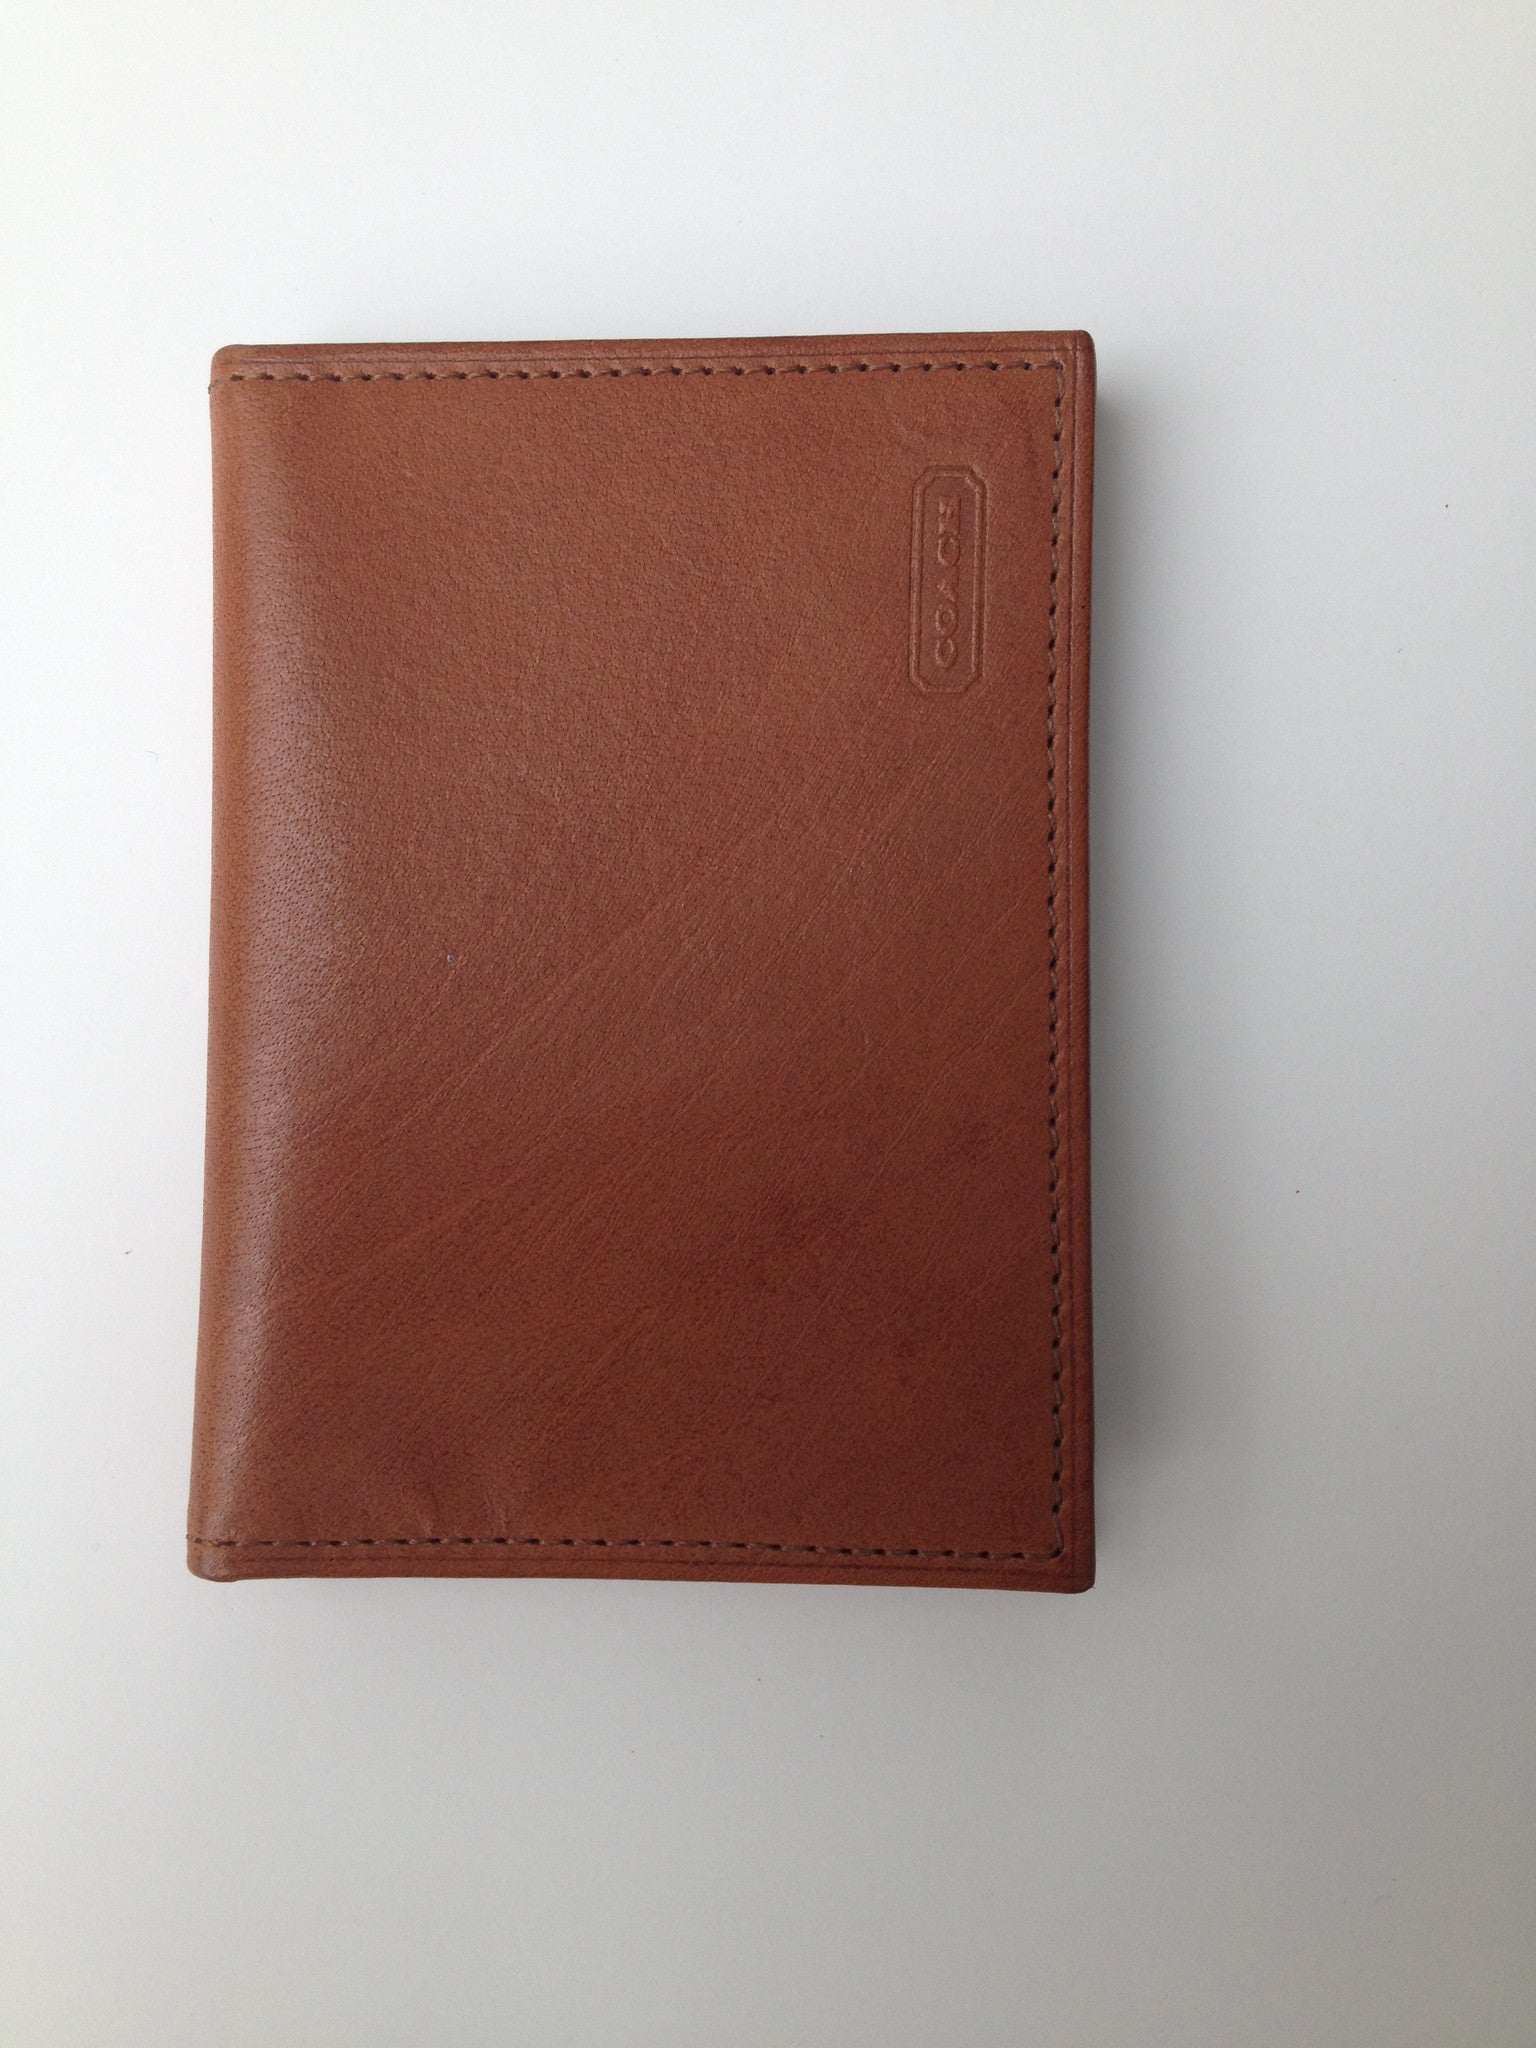 COACH LEATHER CARD HOLDER - but,since